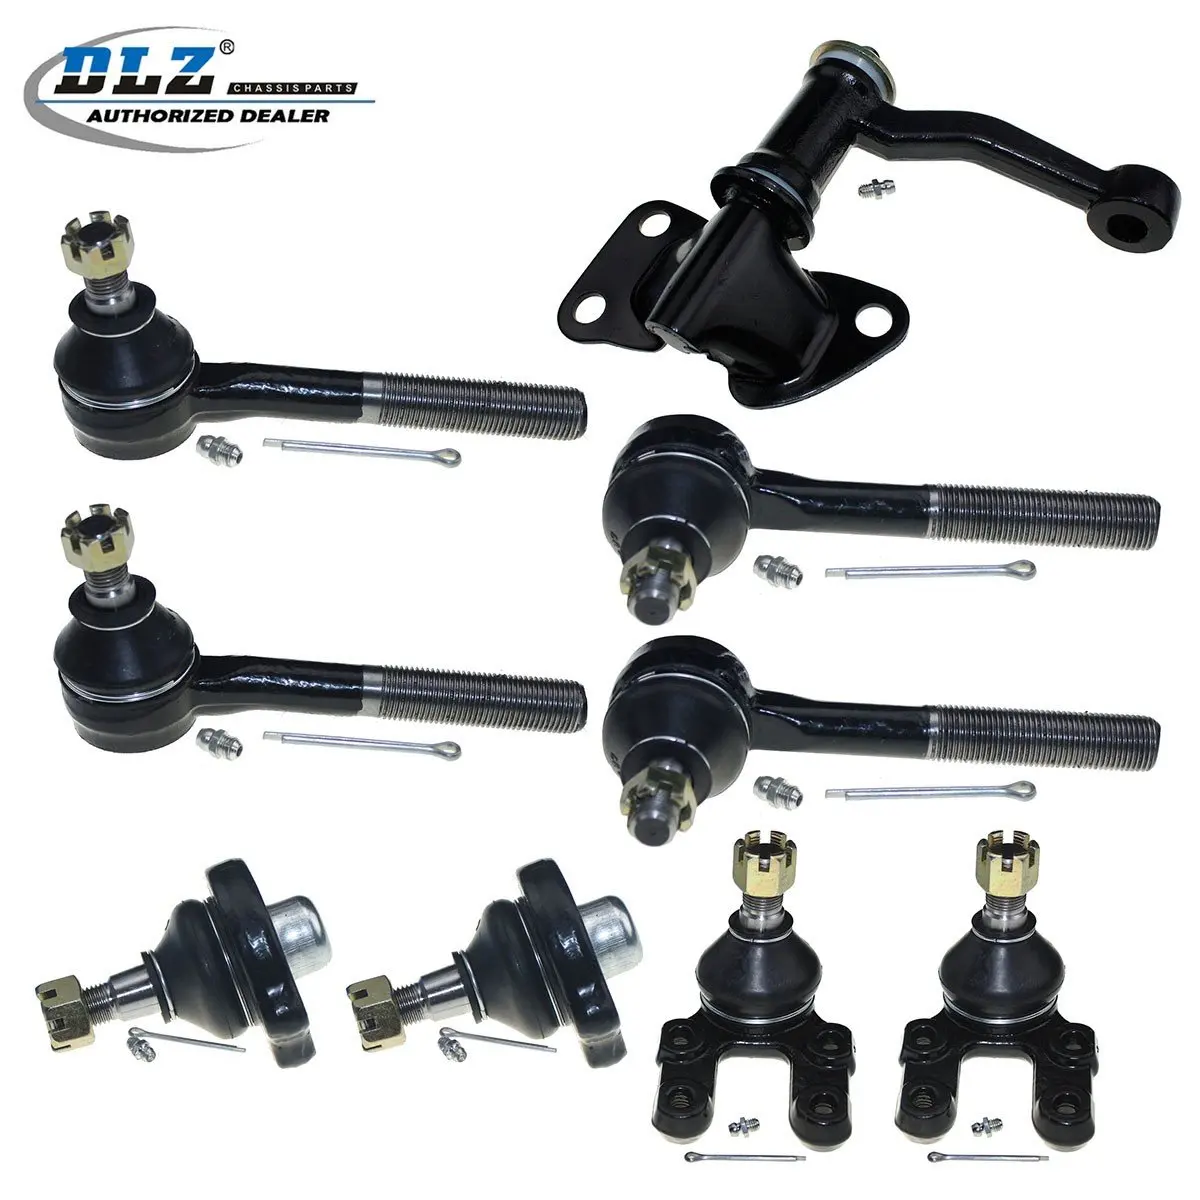 New Steering Kit Tie Rod End Ball Joints For 4WD Nissan D21,Pathfinder,Pick up